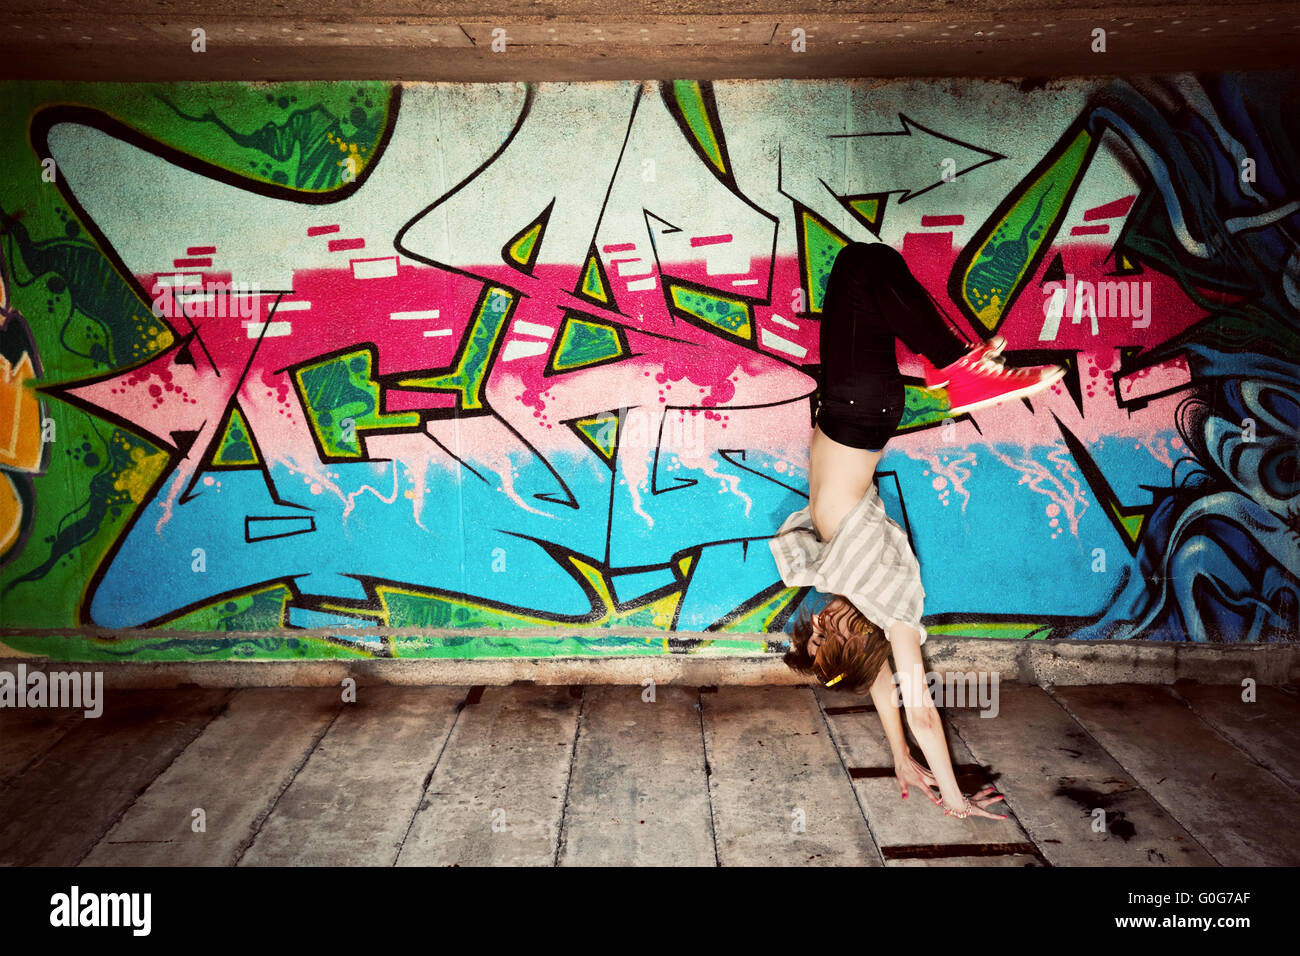 Stylish fashionable girl in a dance pose against colorful graffiti wall. Fashion Stock Photo